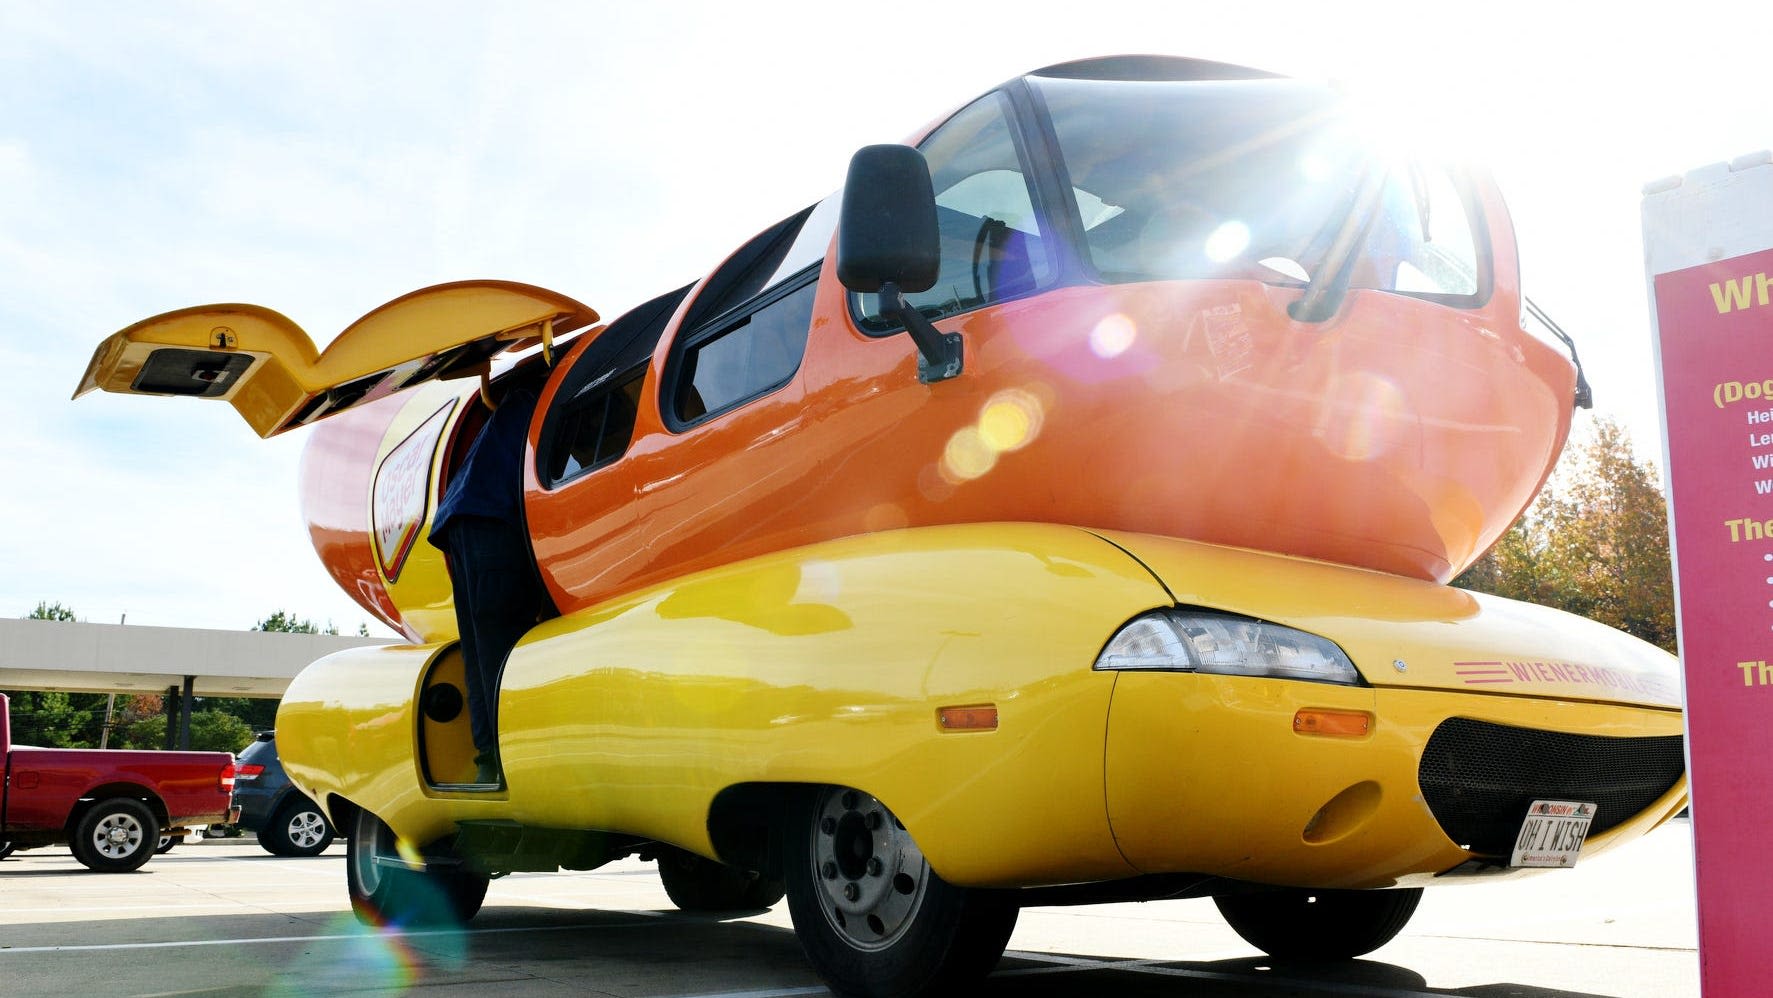 Oscar Mayer Wienermobile in rollover wreck in Illinois, no injuries reported